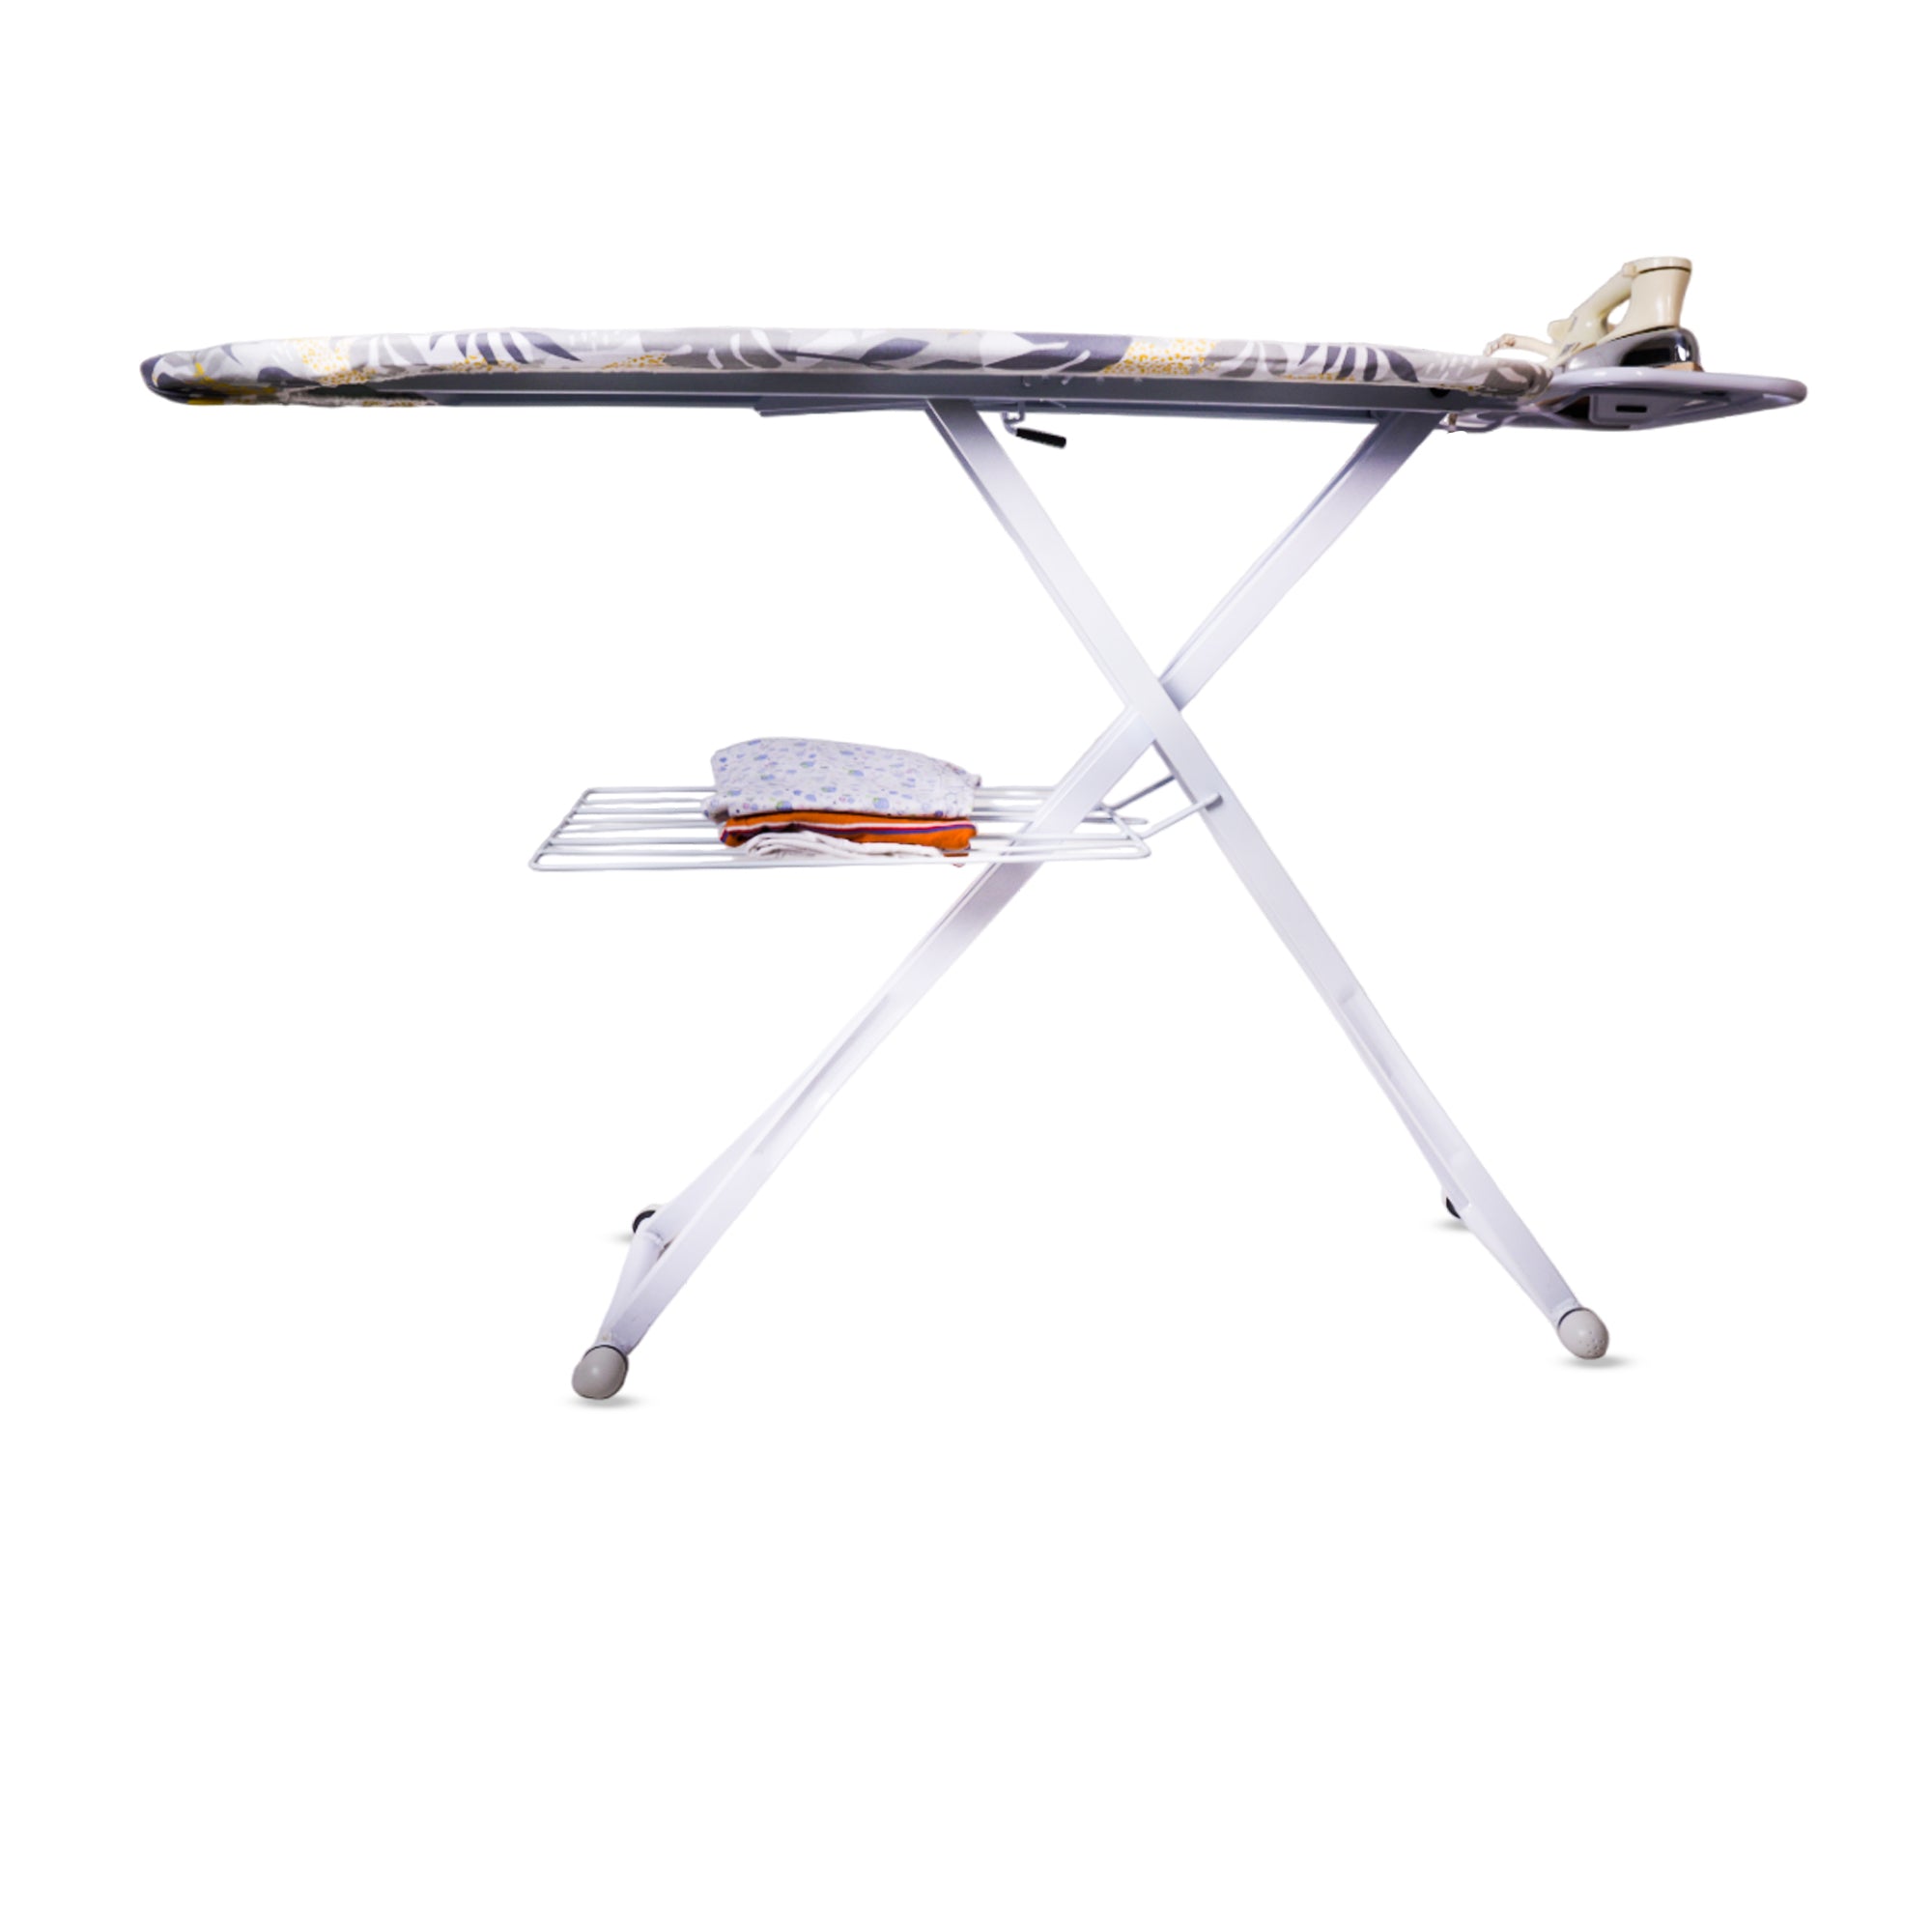 Tallinn Ironing Board |Ironing Board Maxima with Silicone Iron Rest & Silicon Stopper | Height Adjustable | Floral